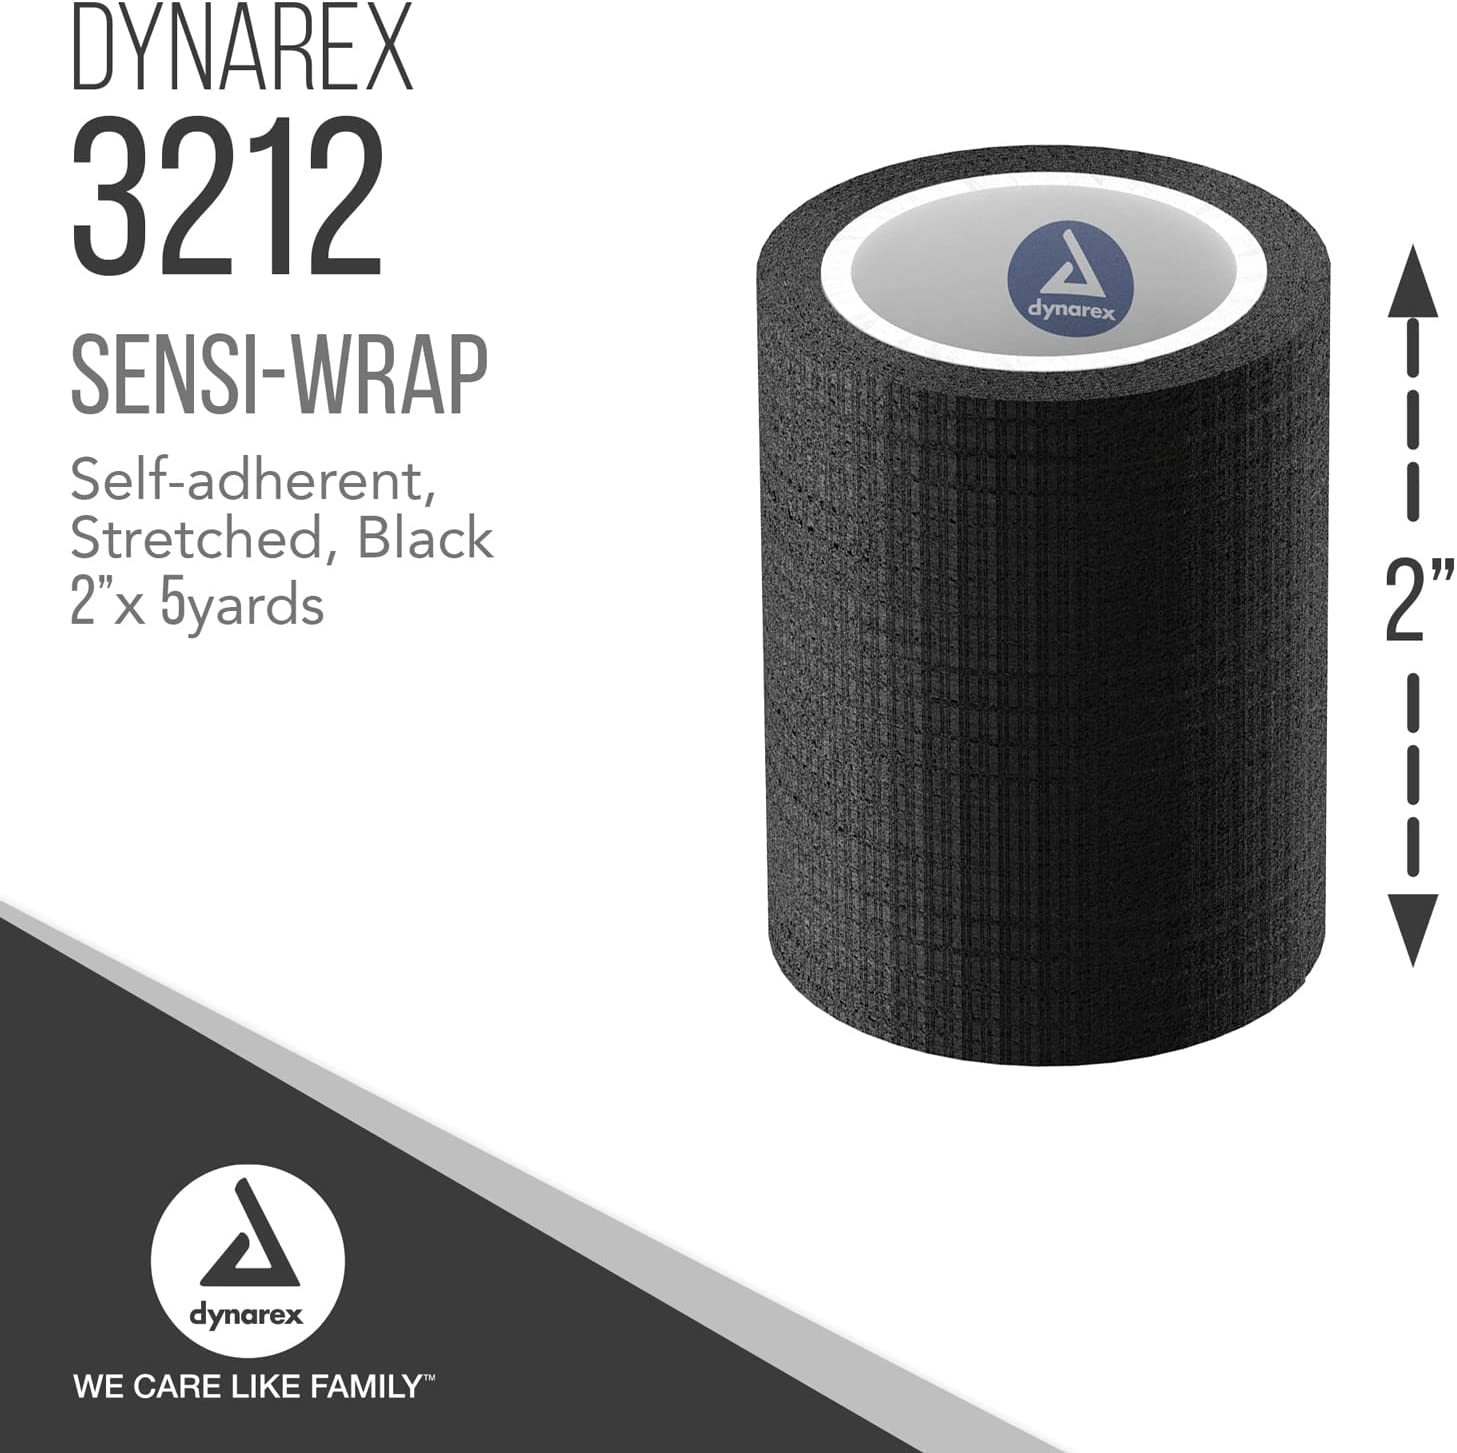 Dynarex Sensi-Wrap Bandage Rolls are a Self-Sticking Wrap Provides Stay in Place Compression. Great for Tough to Wrap Areas of The Body, Over a Bandage or Tattoo. Black, 2” x 5 yds, 1 Box of 36 Rolls